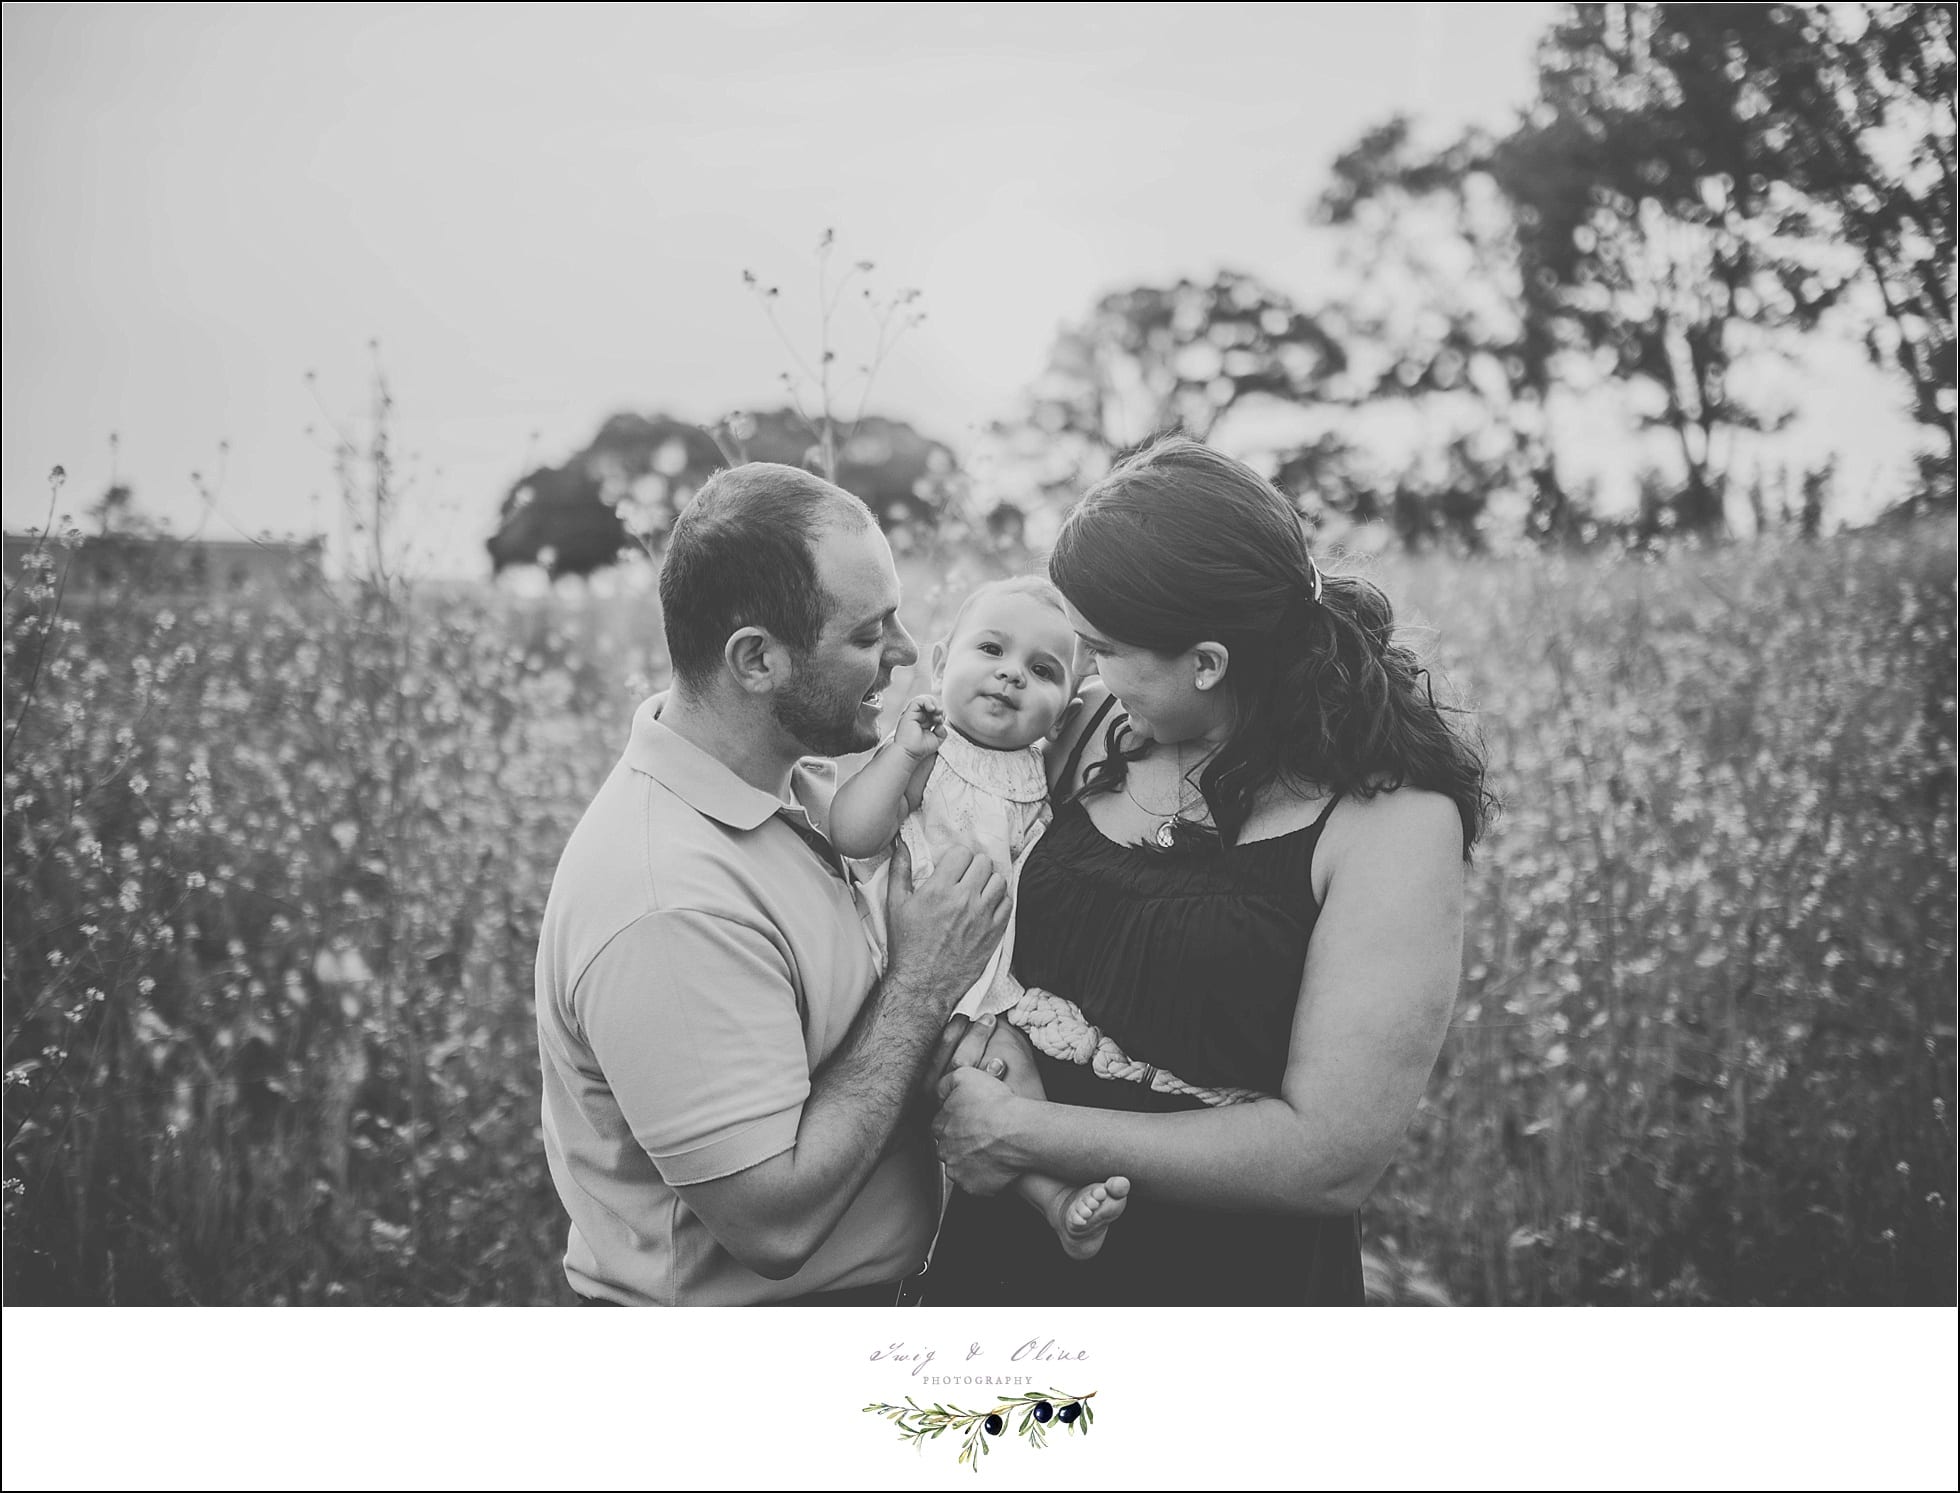 black and white classic image, parents, baby